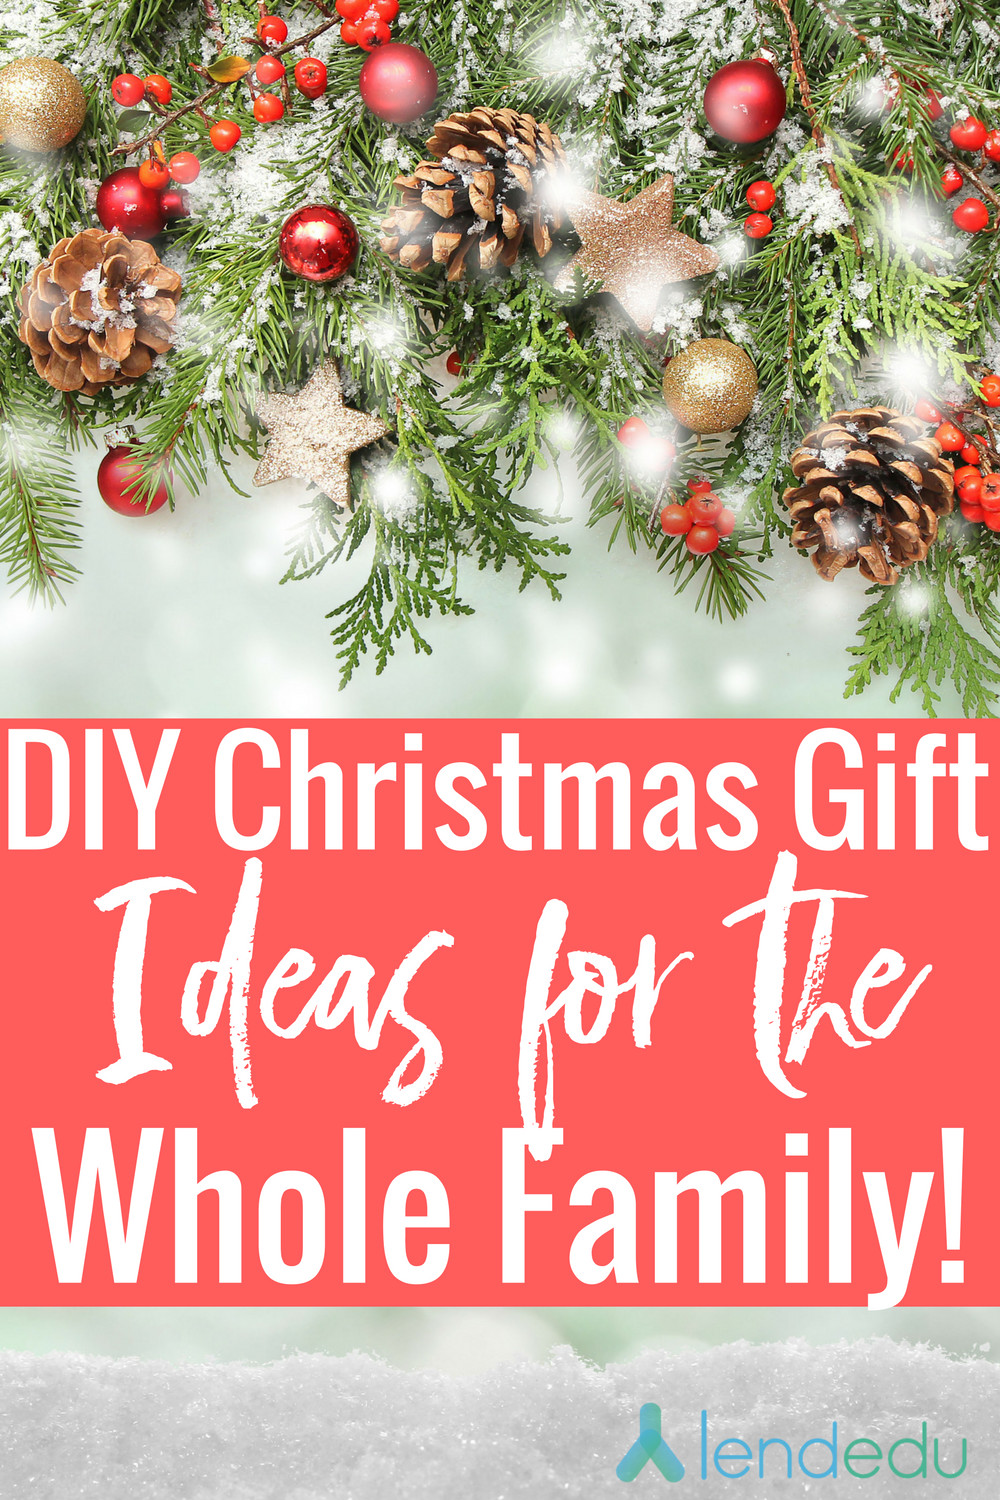 DIY Family Gift
 DIY Christmas Gifts for the Whole Family LendEDU